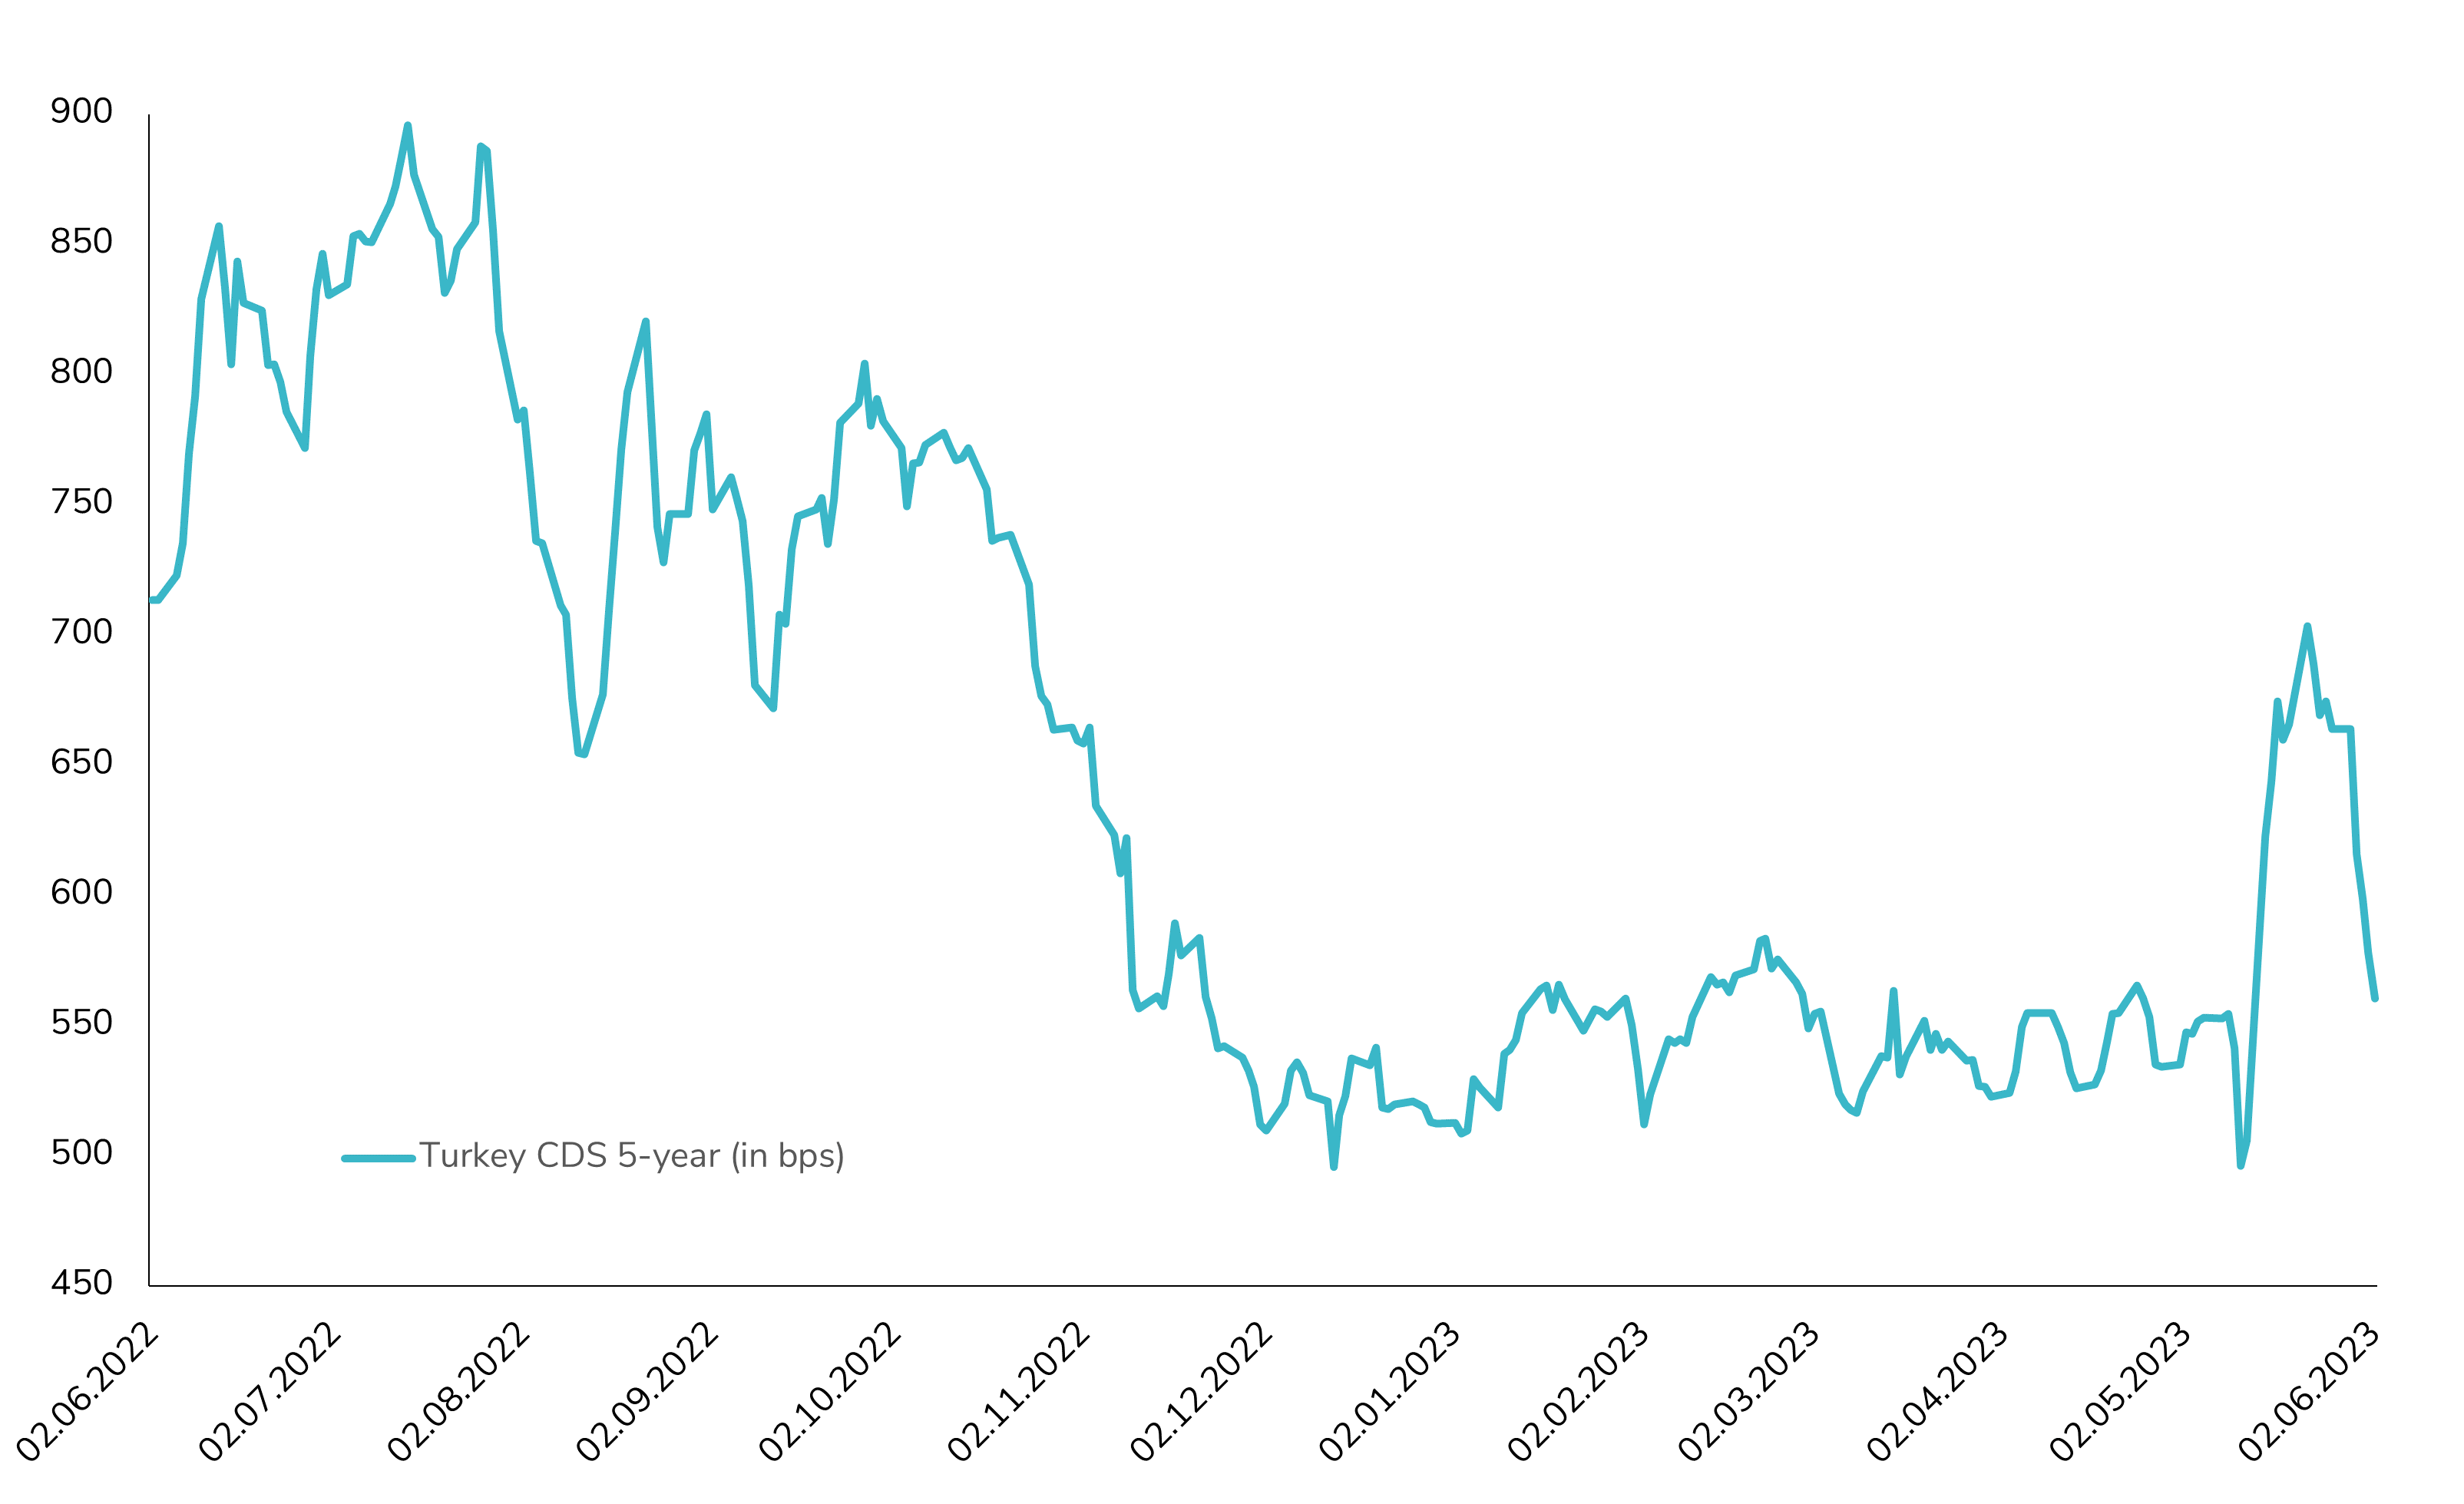 Turkey 5-year CDS back to pre-election levels!